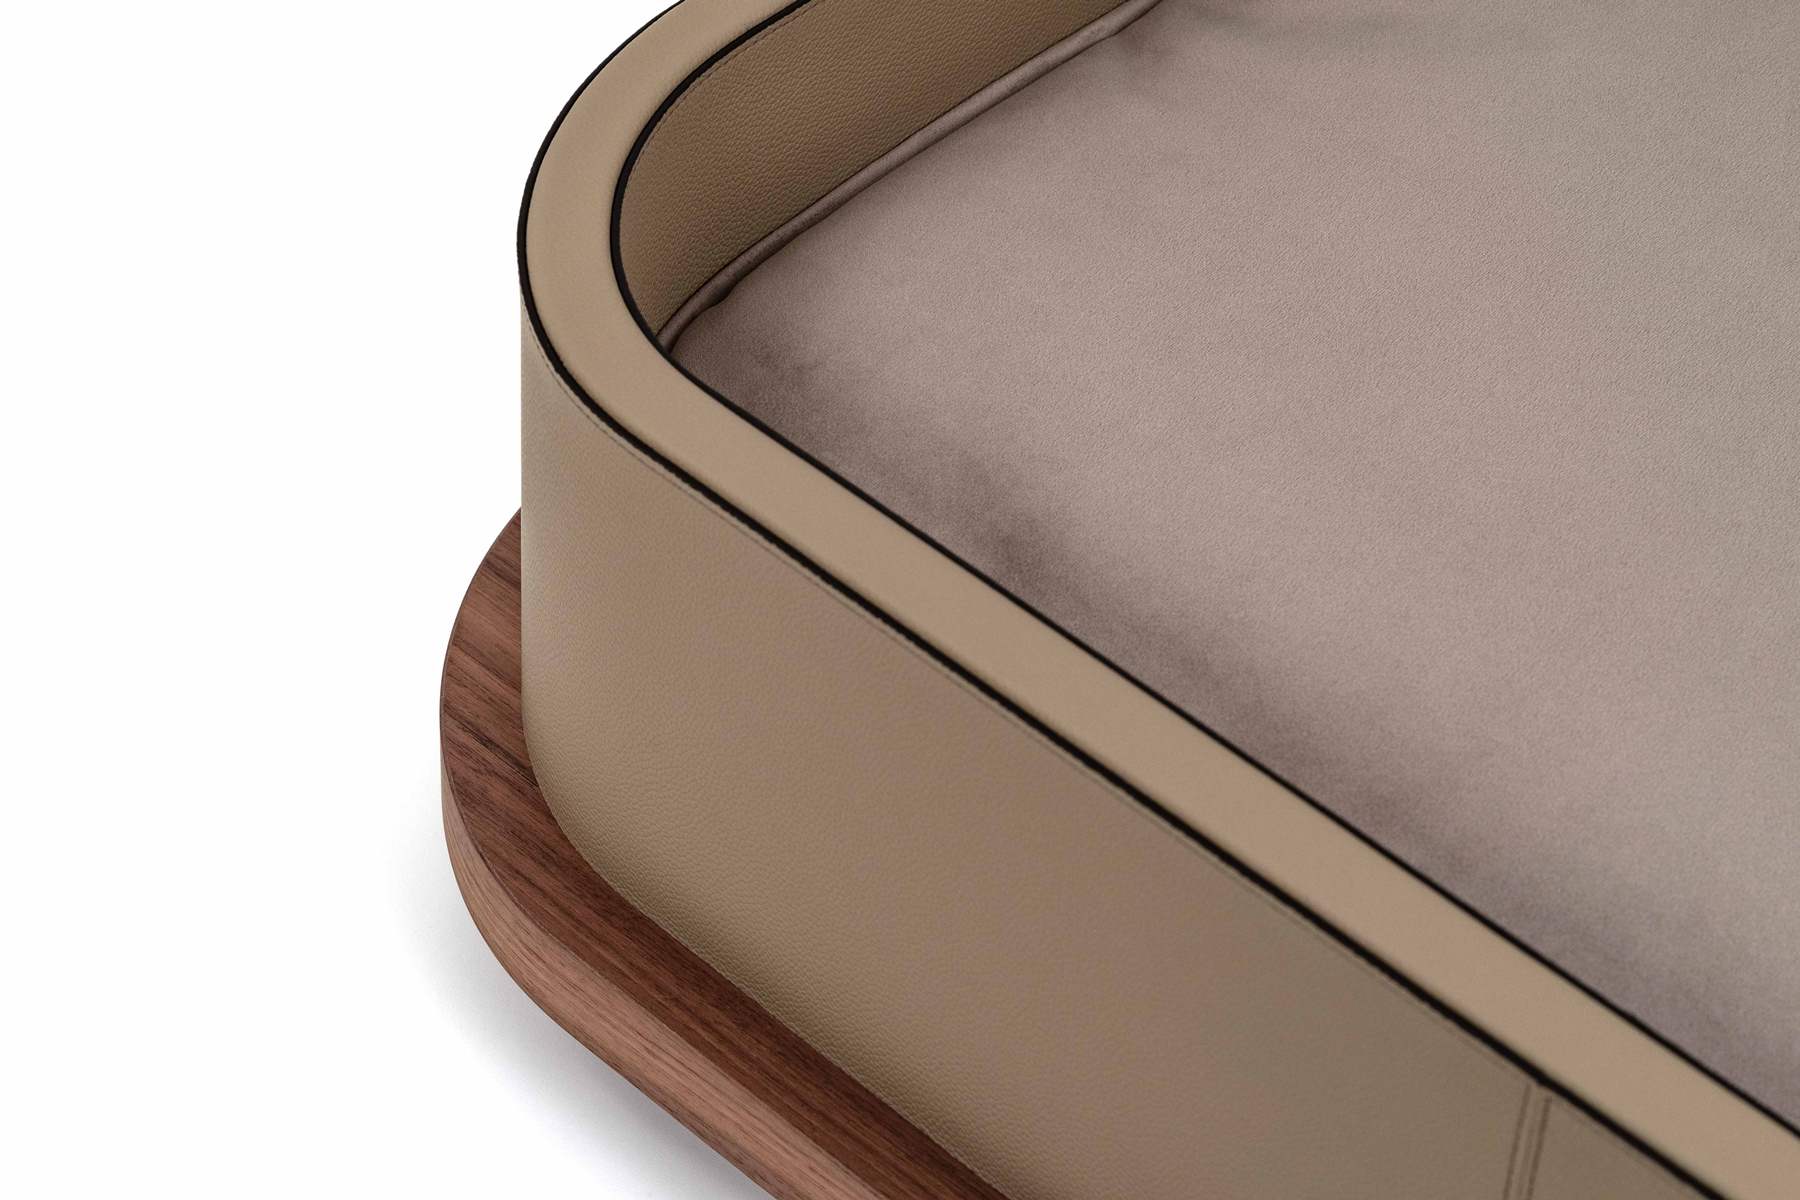 Pinetti Leather-Covered Wooden Pet Bed With Microfiber Memory Foam Cushion | Wooden structure covered in leather | Canaletto walnut base | Soft memory foam cushion with microfiber cover | Easily removable and washable | Available in two sizes | Discover Luxury Lifestyle Accessories at 2Jour Concierge, #1 luxury high-end gift & lifestyle shop